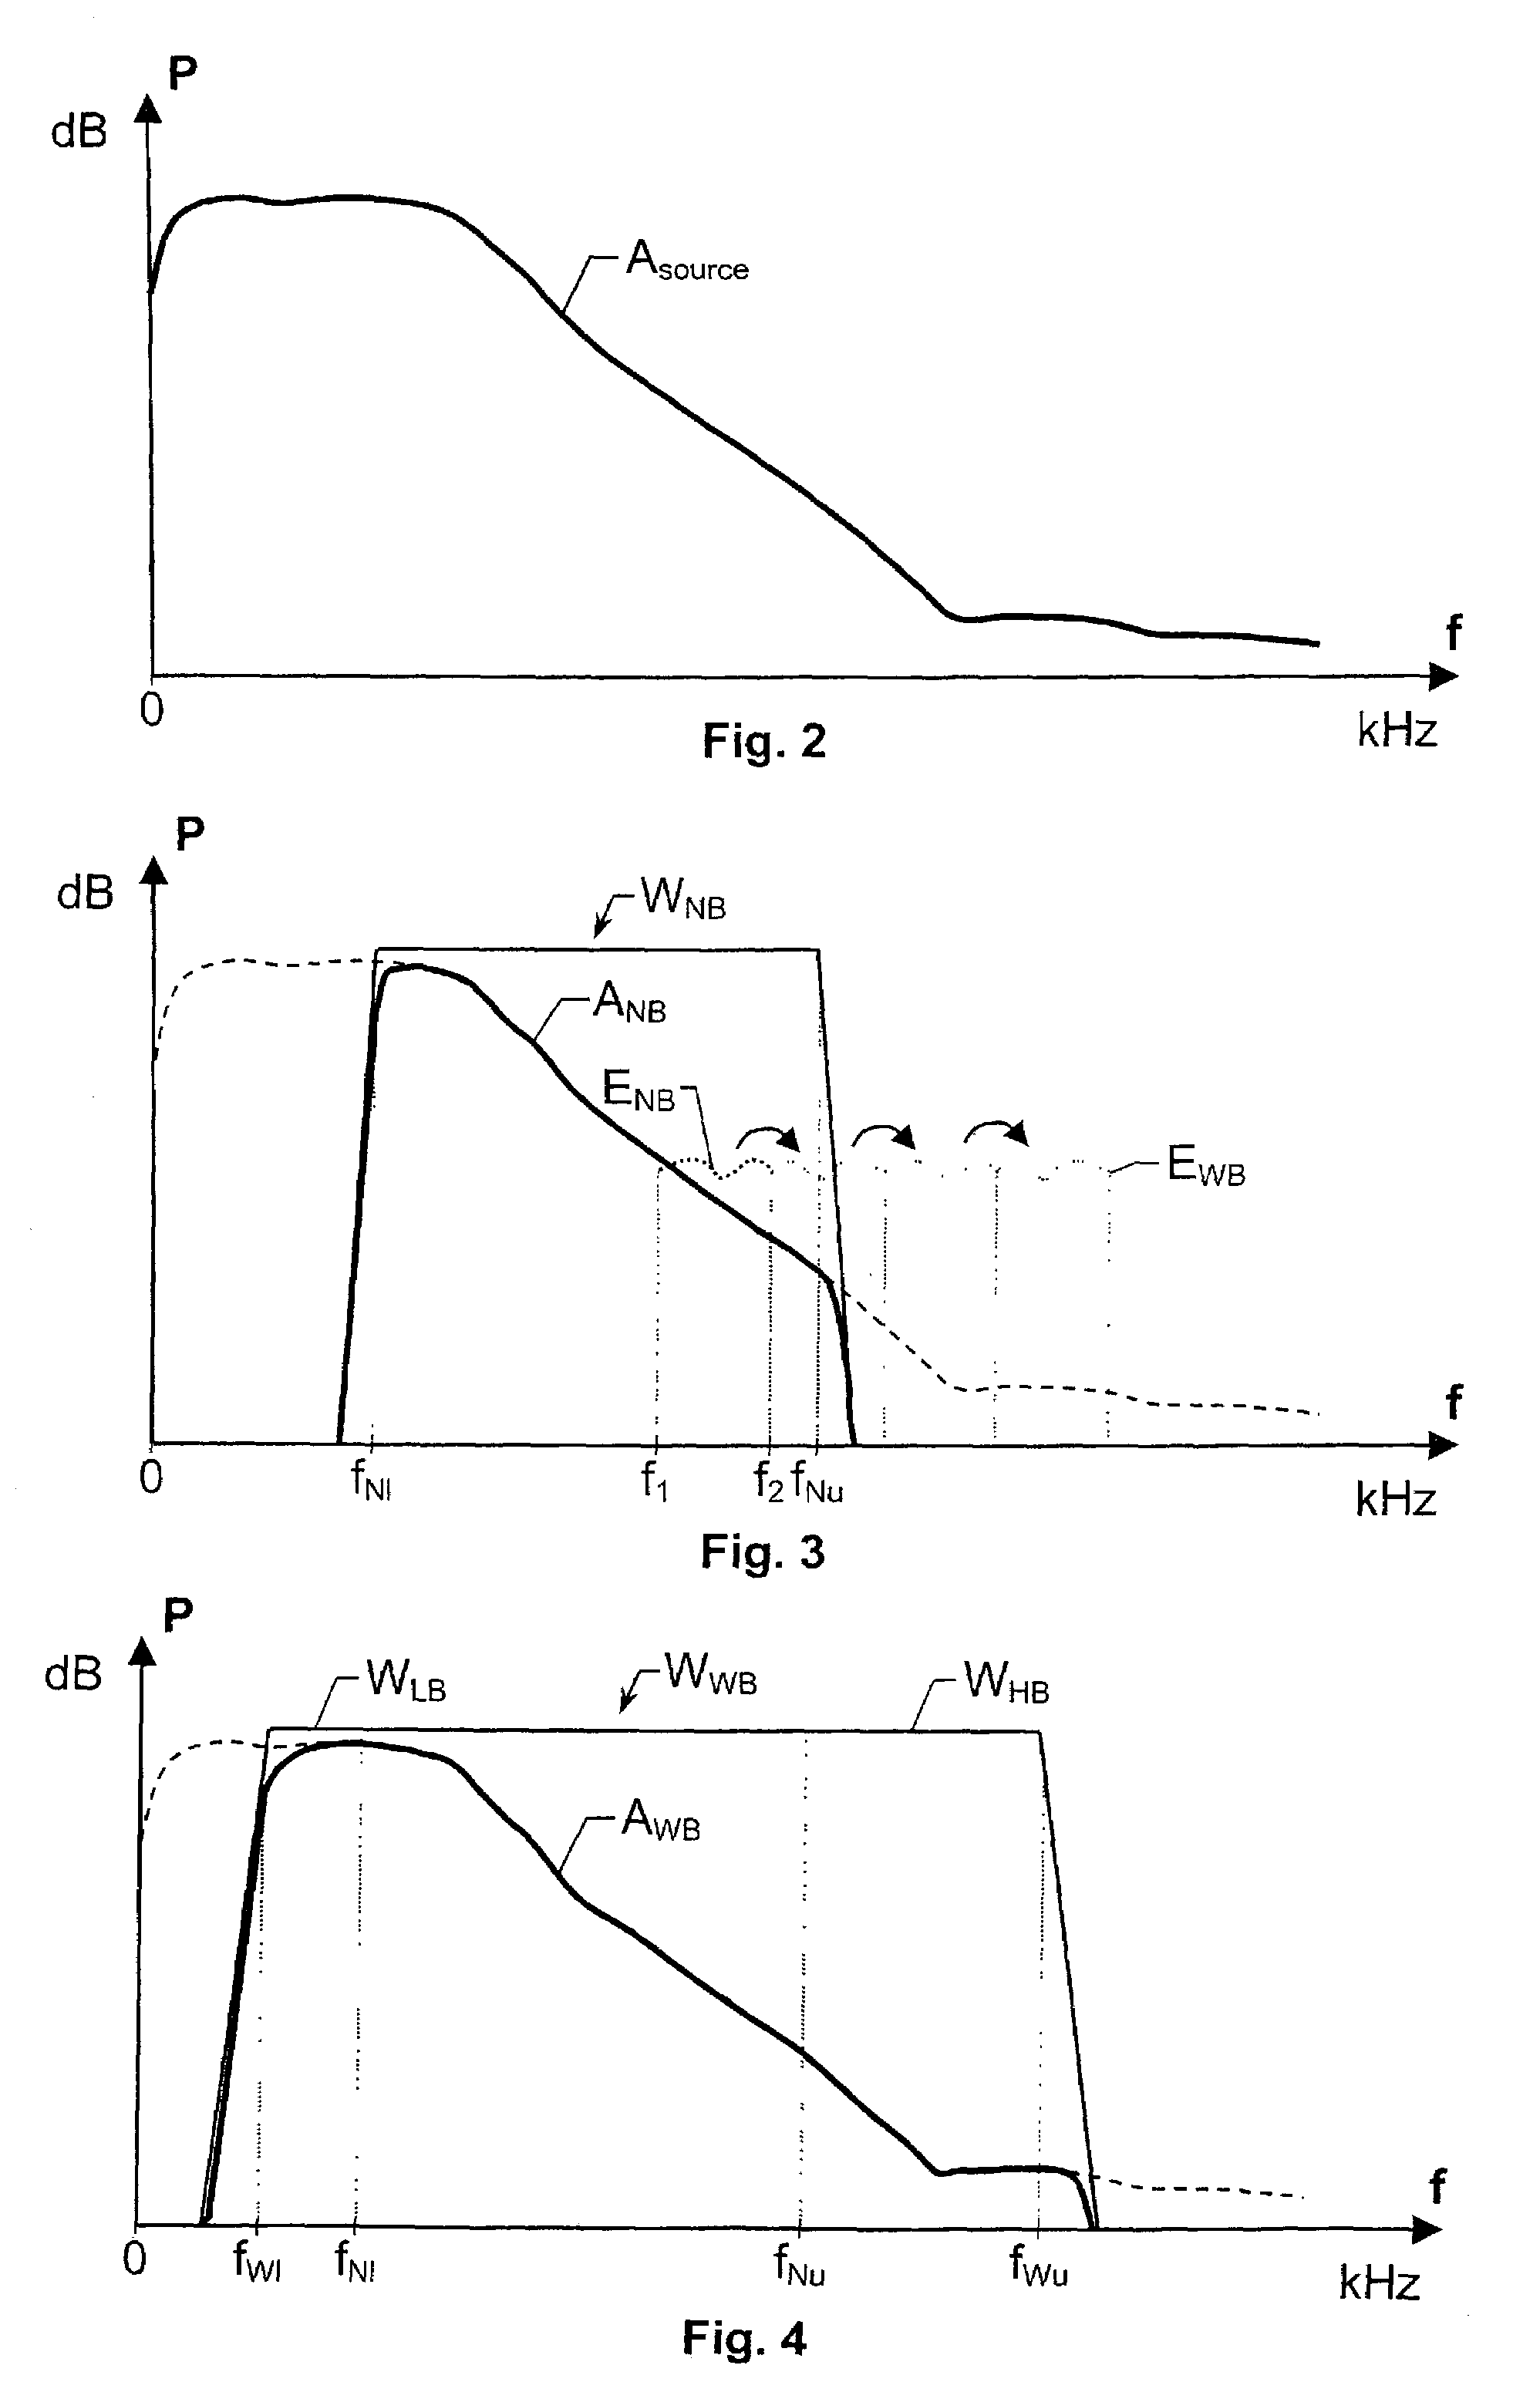 Bandwidth extension of acoustic signals